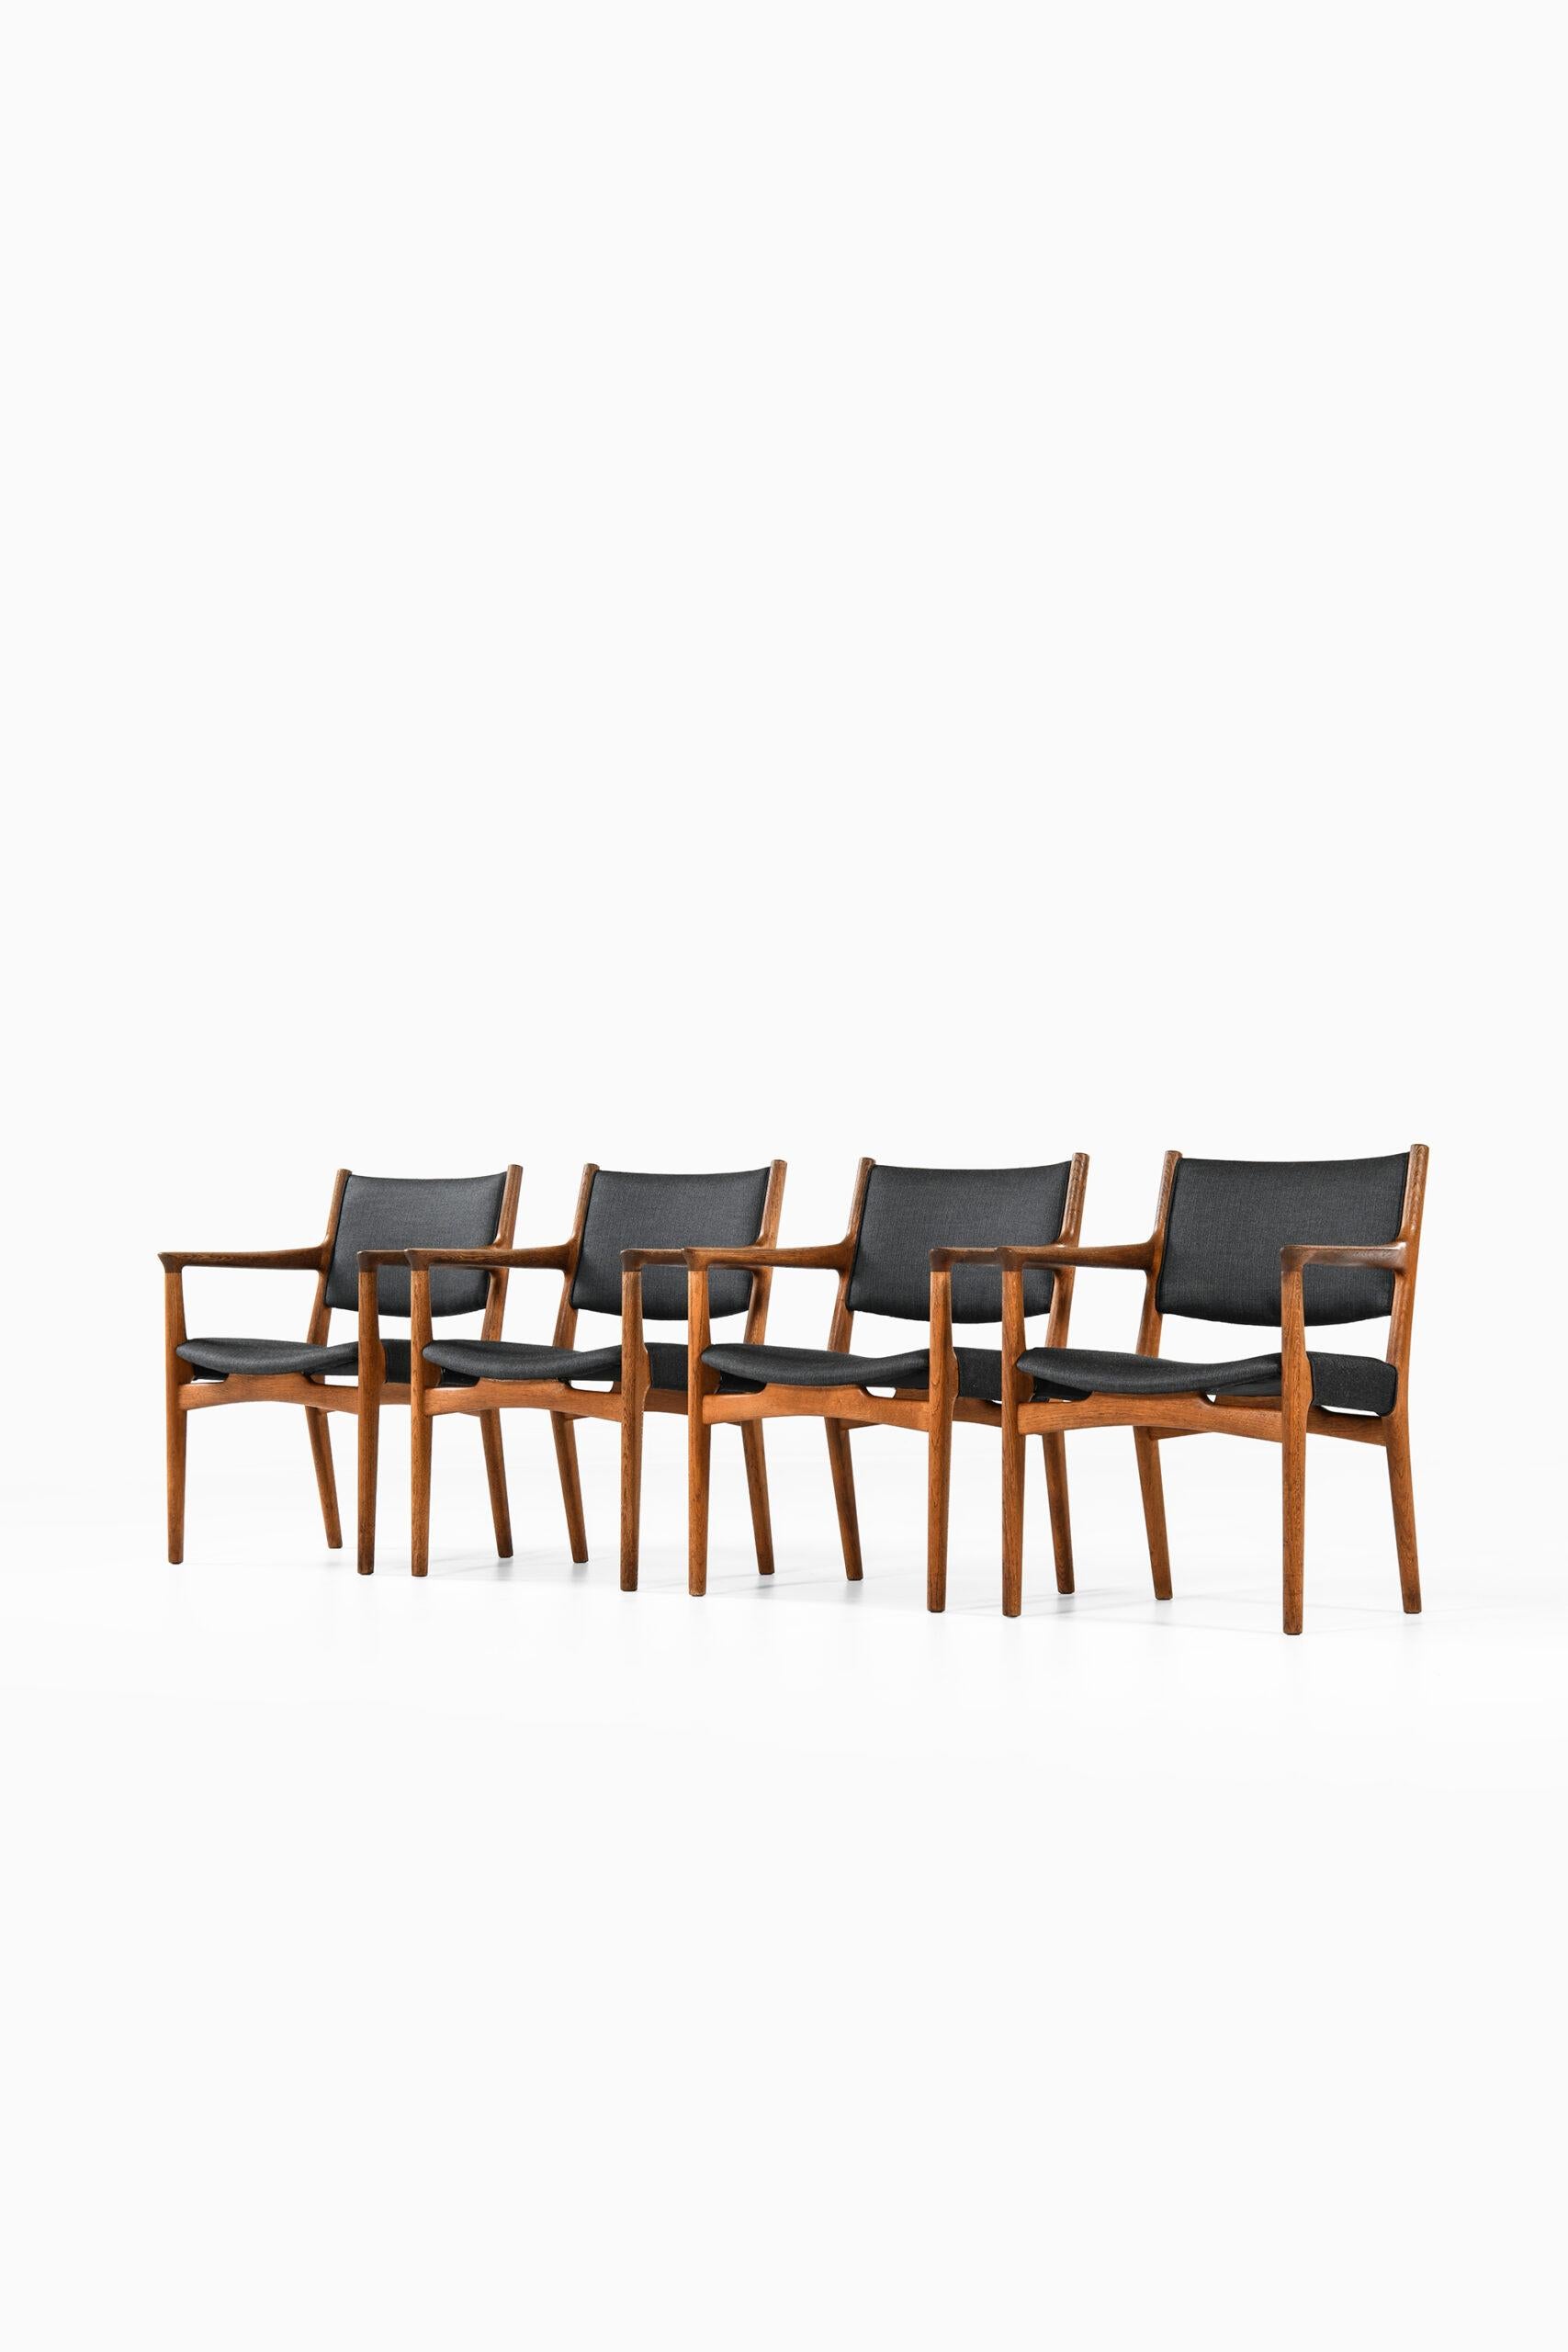 Very rare armchairs model JH-525 designed by Hans Wegner. Produced by cabinetmaker Johannes Hansen in Denmark. Matching set of 4 more chairs available.